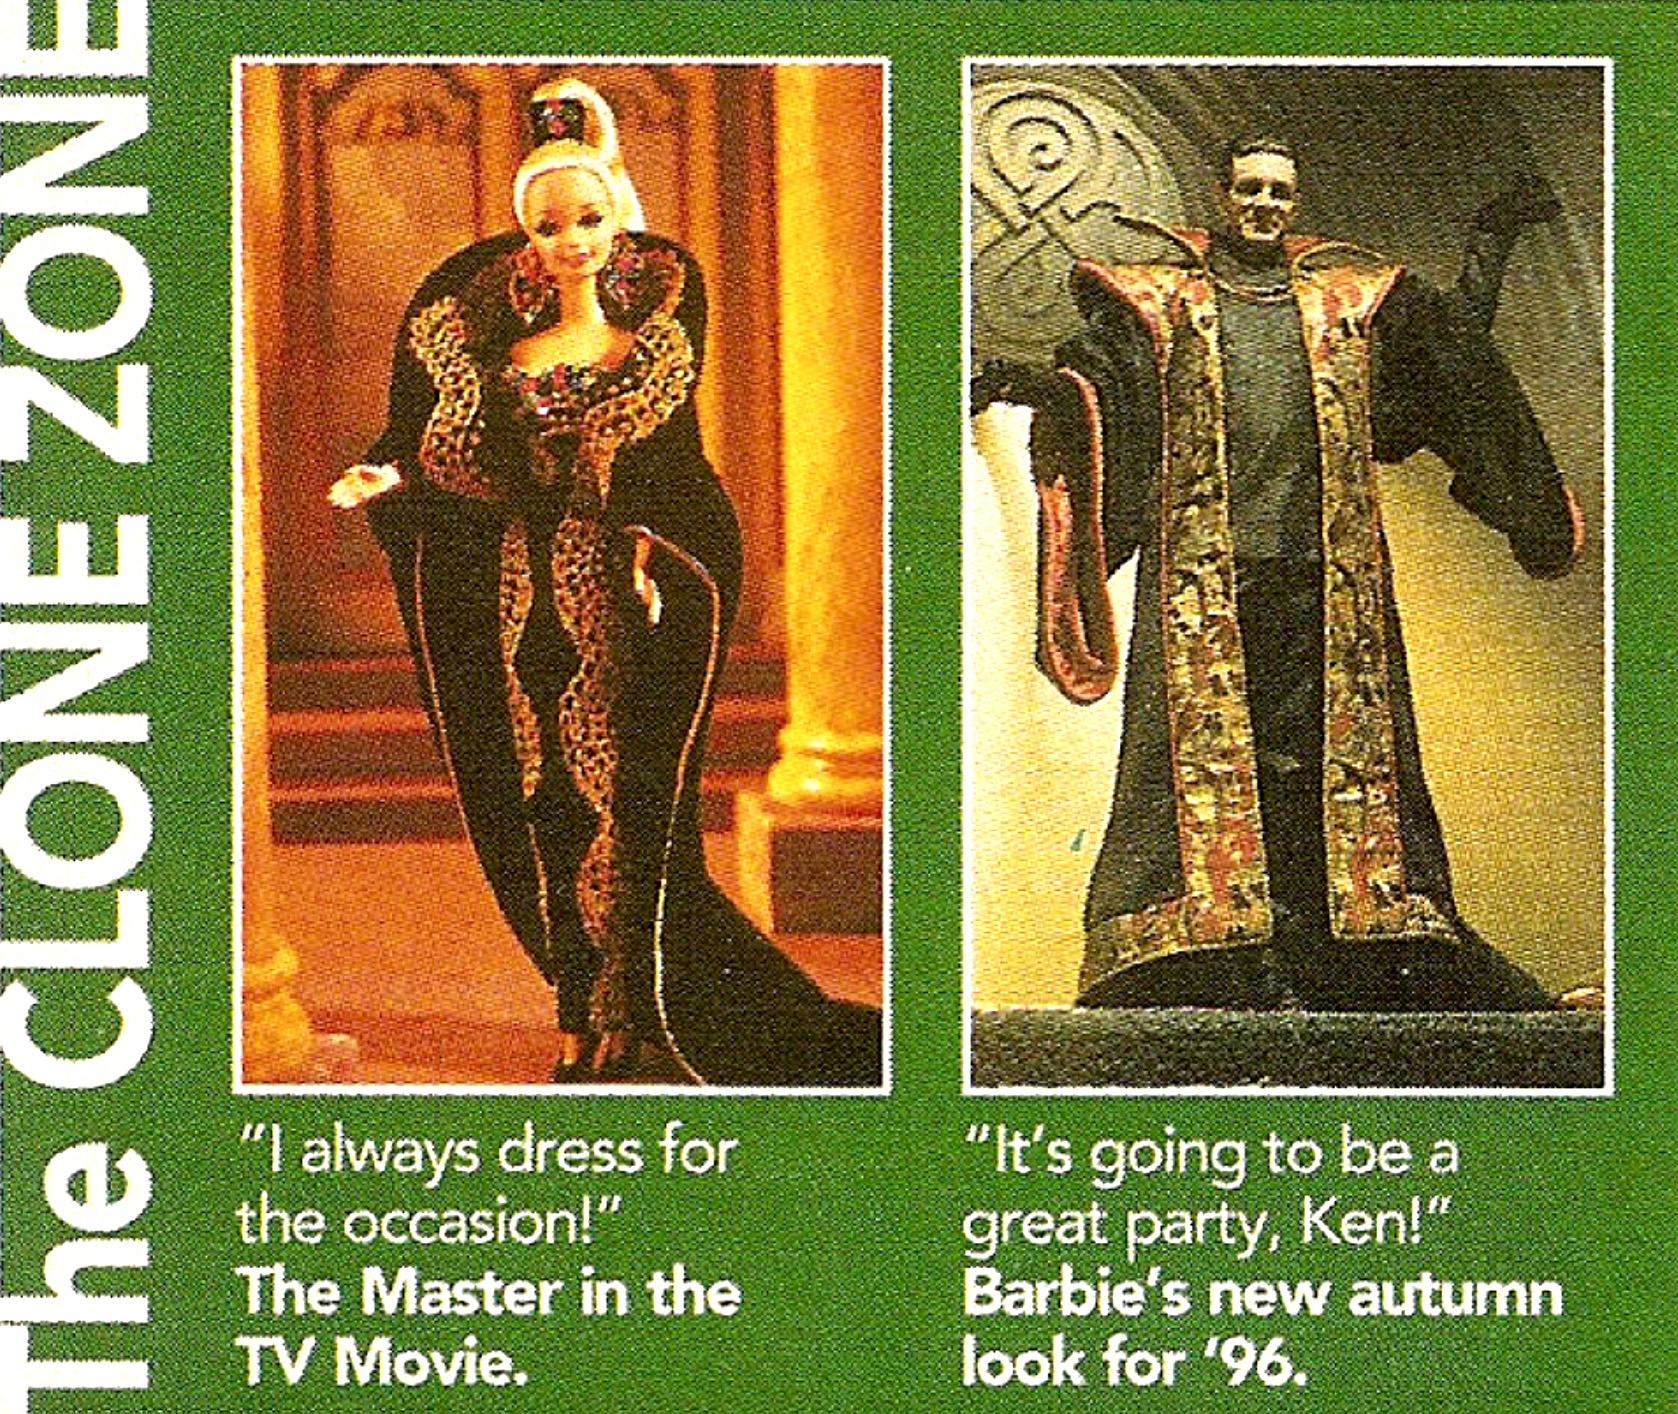 DWM 243 jokingly compares the Bruce Master to the 1995 Midnight Gala Barbie doll.